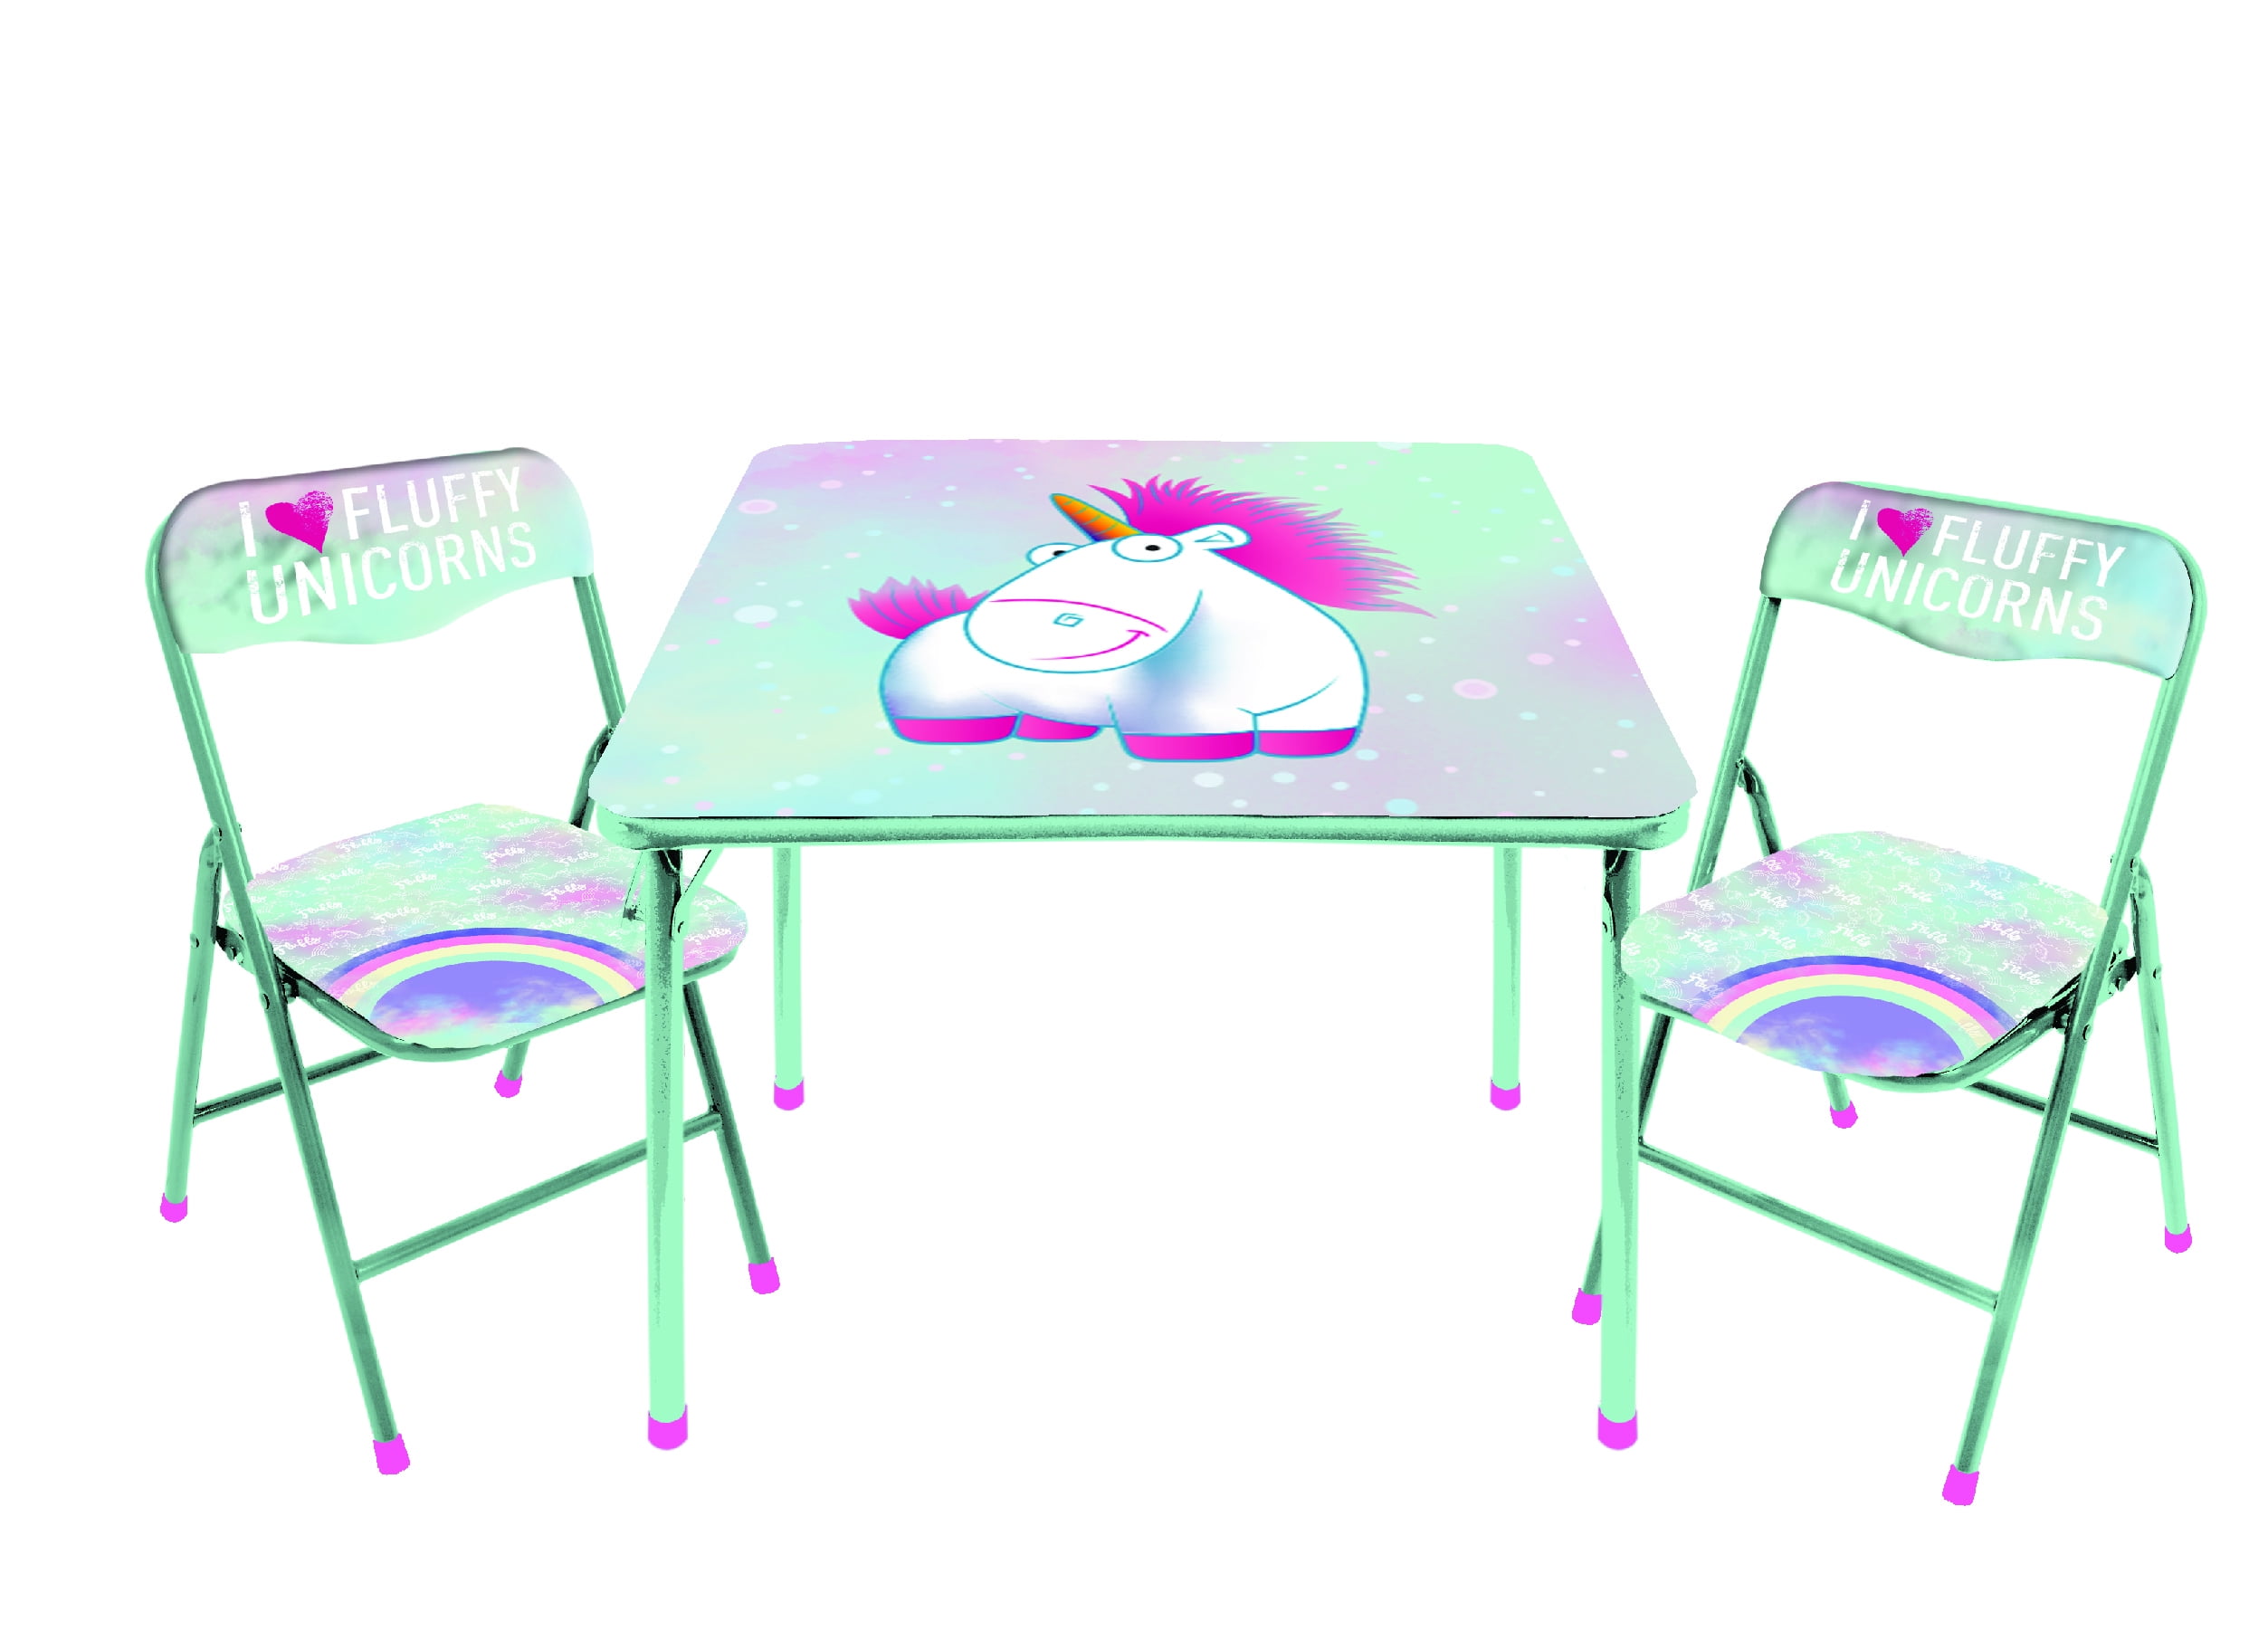 Fluffy the Unicorn 3 Piece Table and 